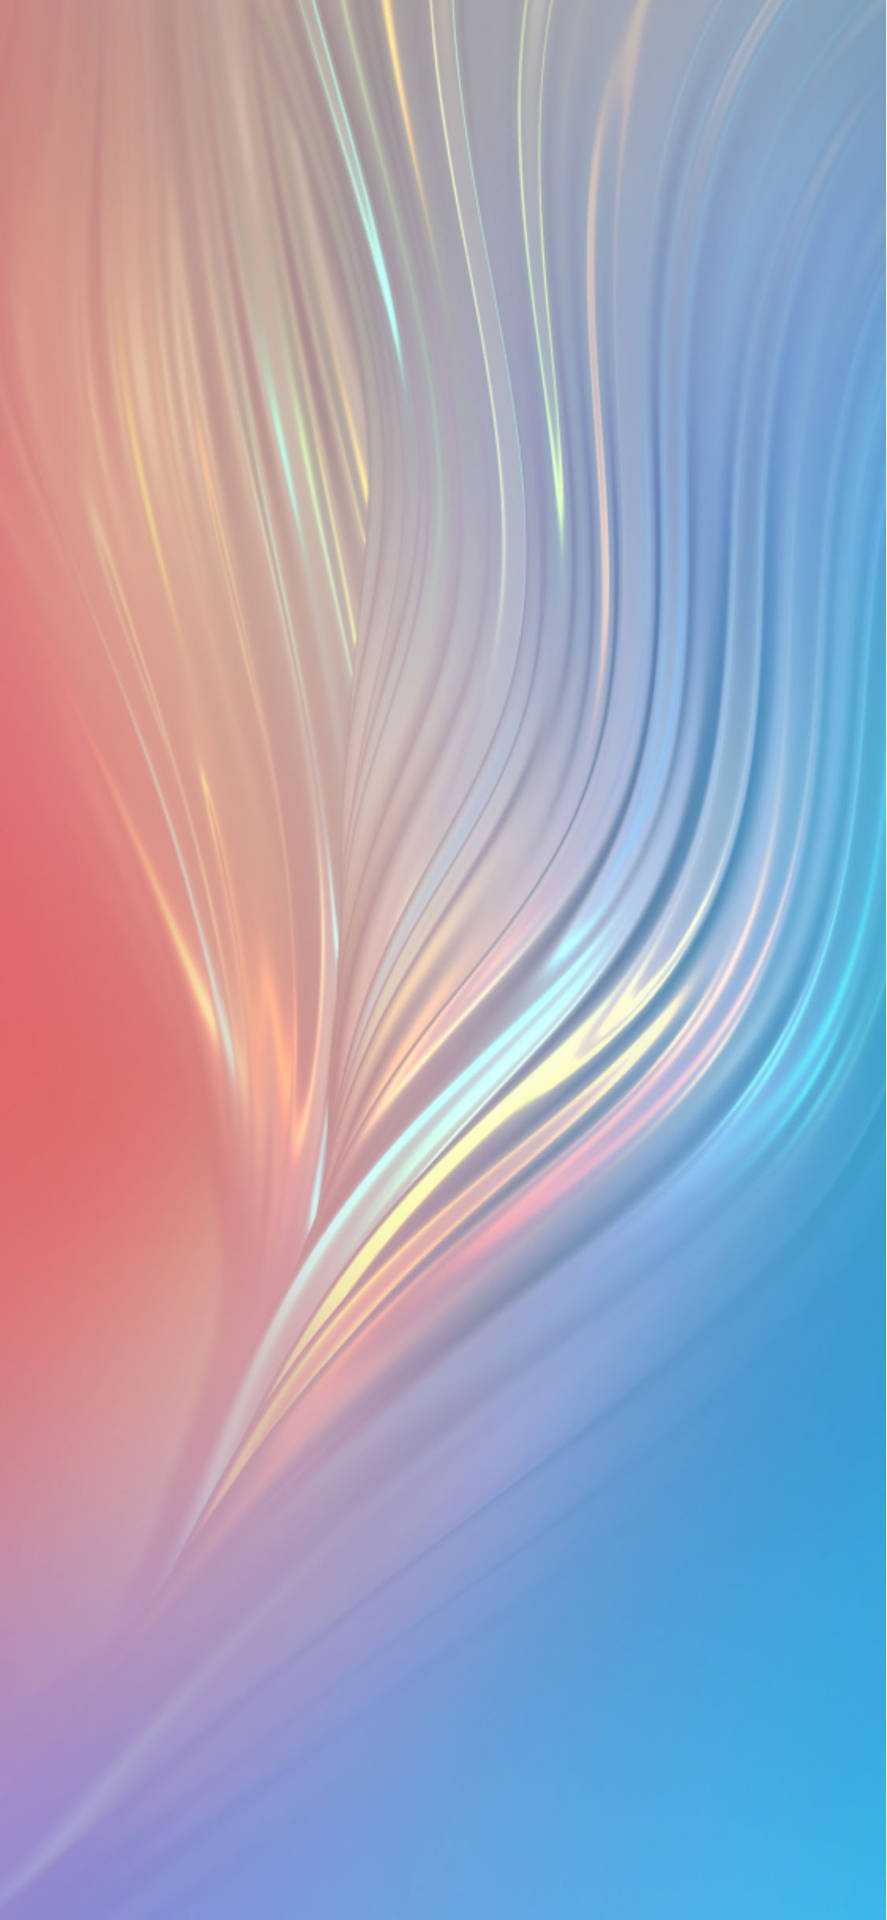 Holographic Cellophane Top Iphone Hd Background